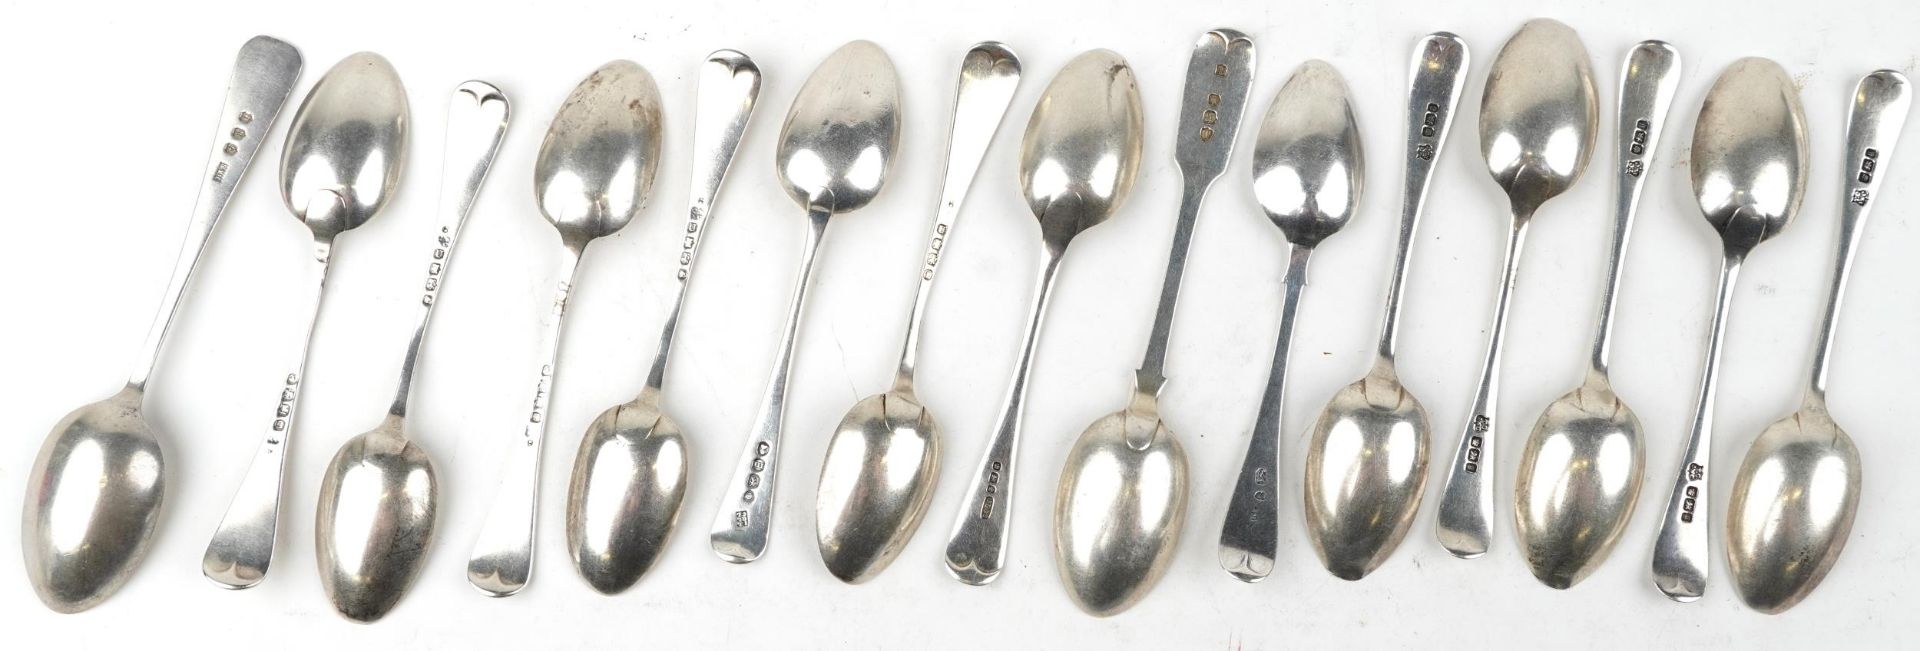 Fifteen Georgian and later silver teaspoons, the largest 14.5cm in length, total 306.5g - Image 4 of 6